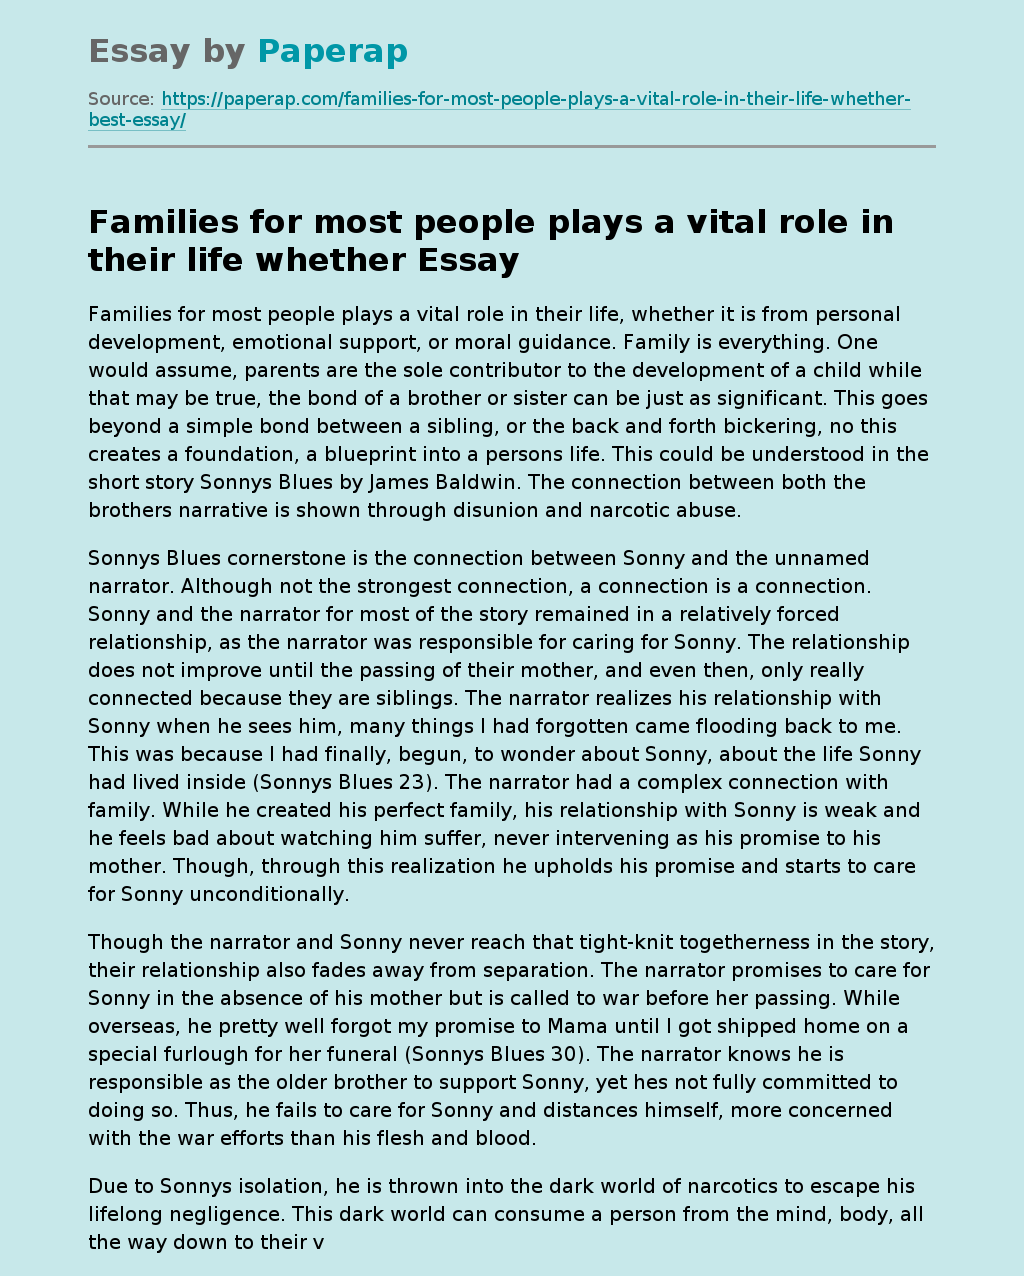 Families for Most People plays a Vital Role in Their life Whether